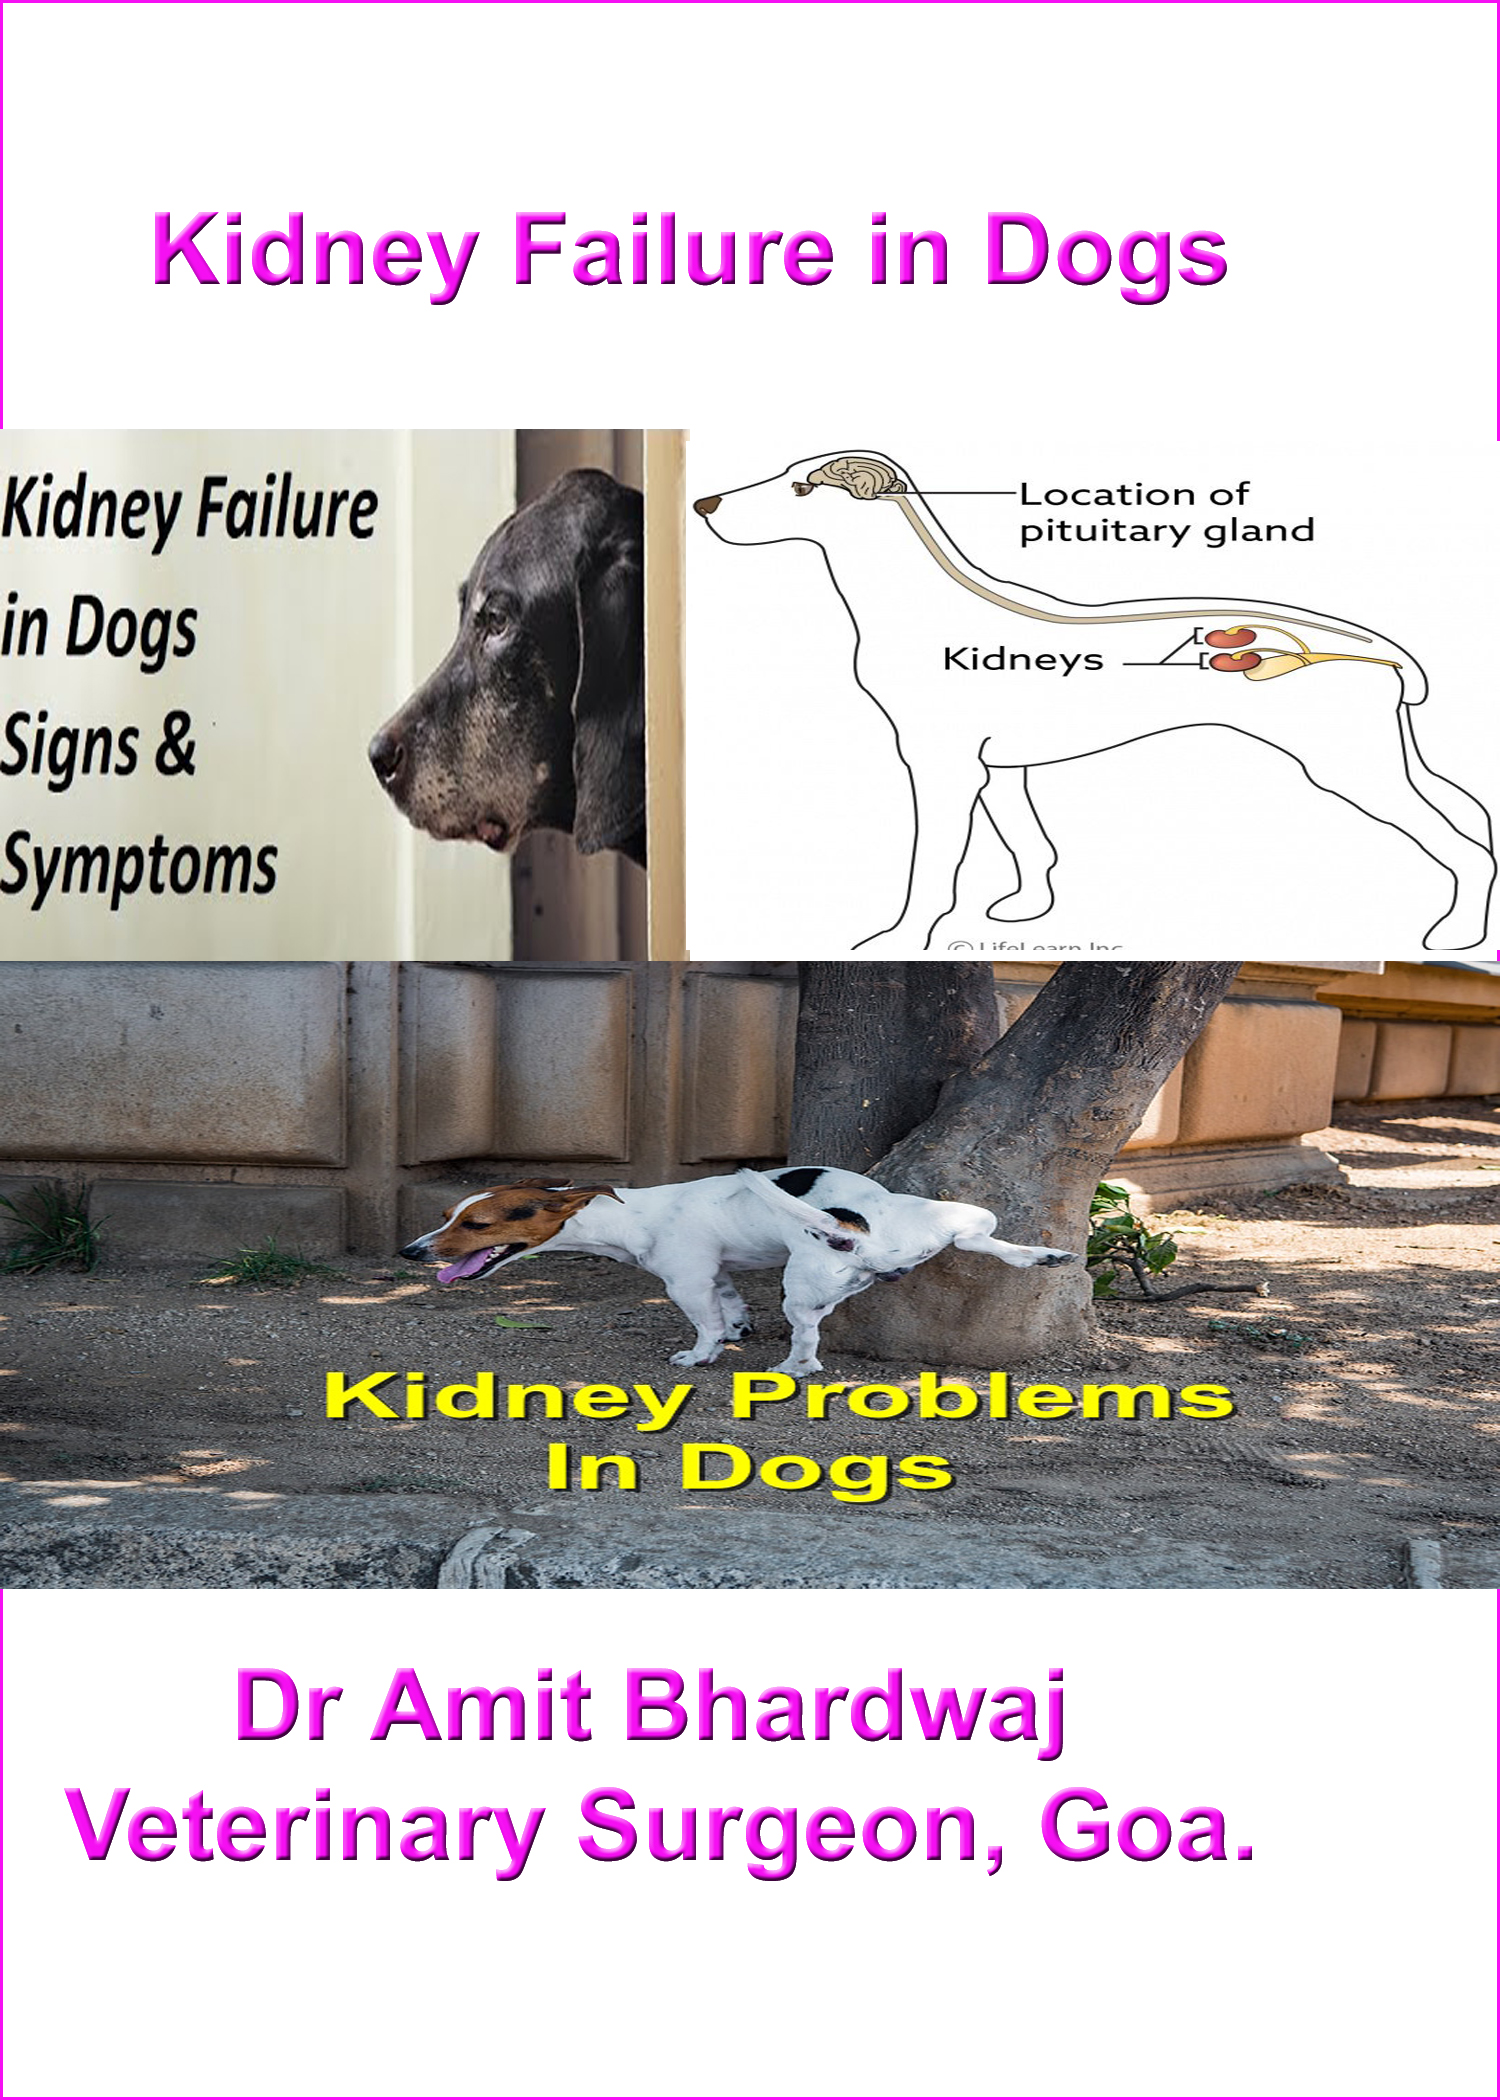 can acute kidney failure in dogs be cured